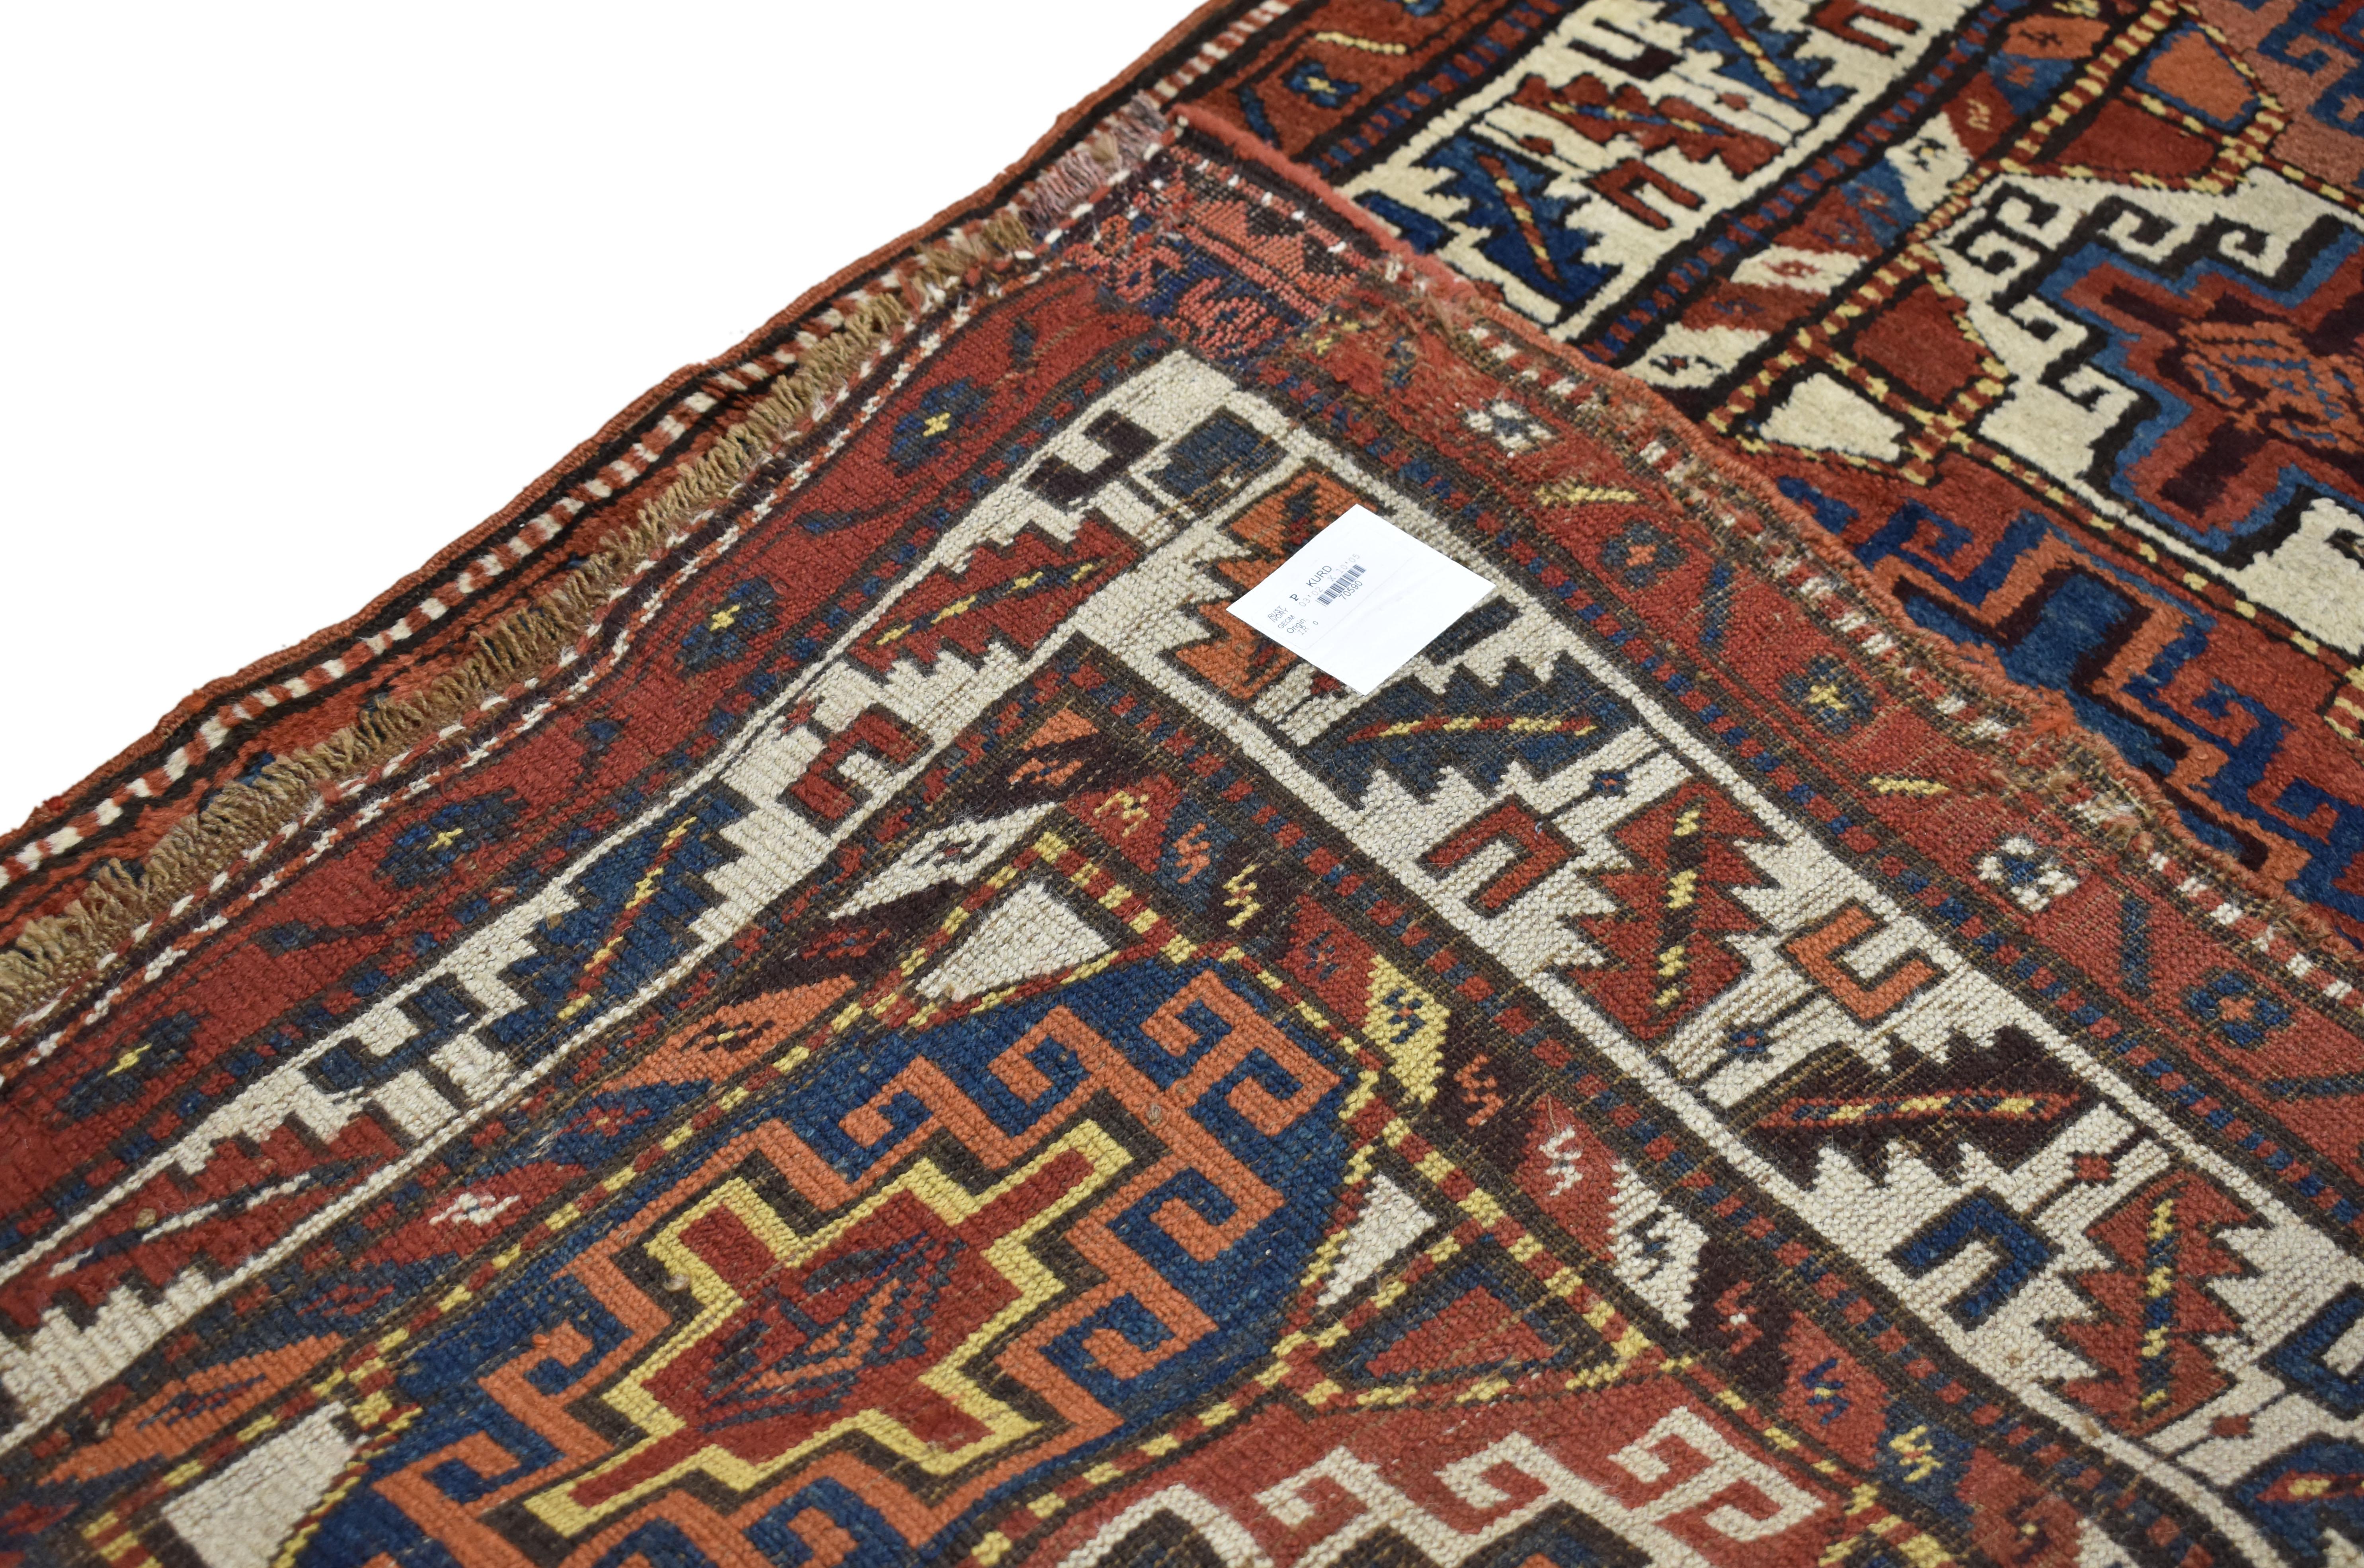 Antique Persian Kurdish Rug with Nomadic Raconteur Style, Hallway Runner In Good Condition For Sale In Dallas, TX